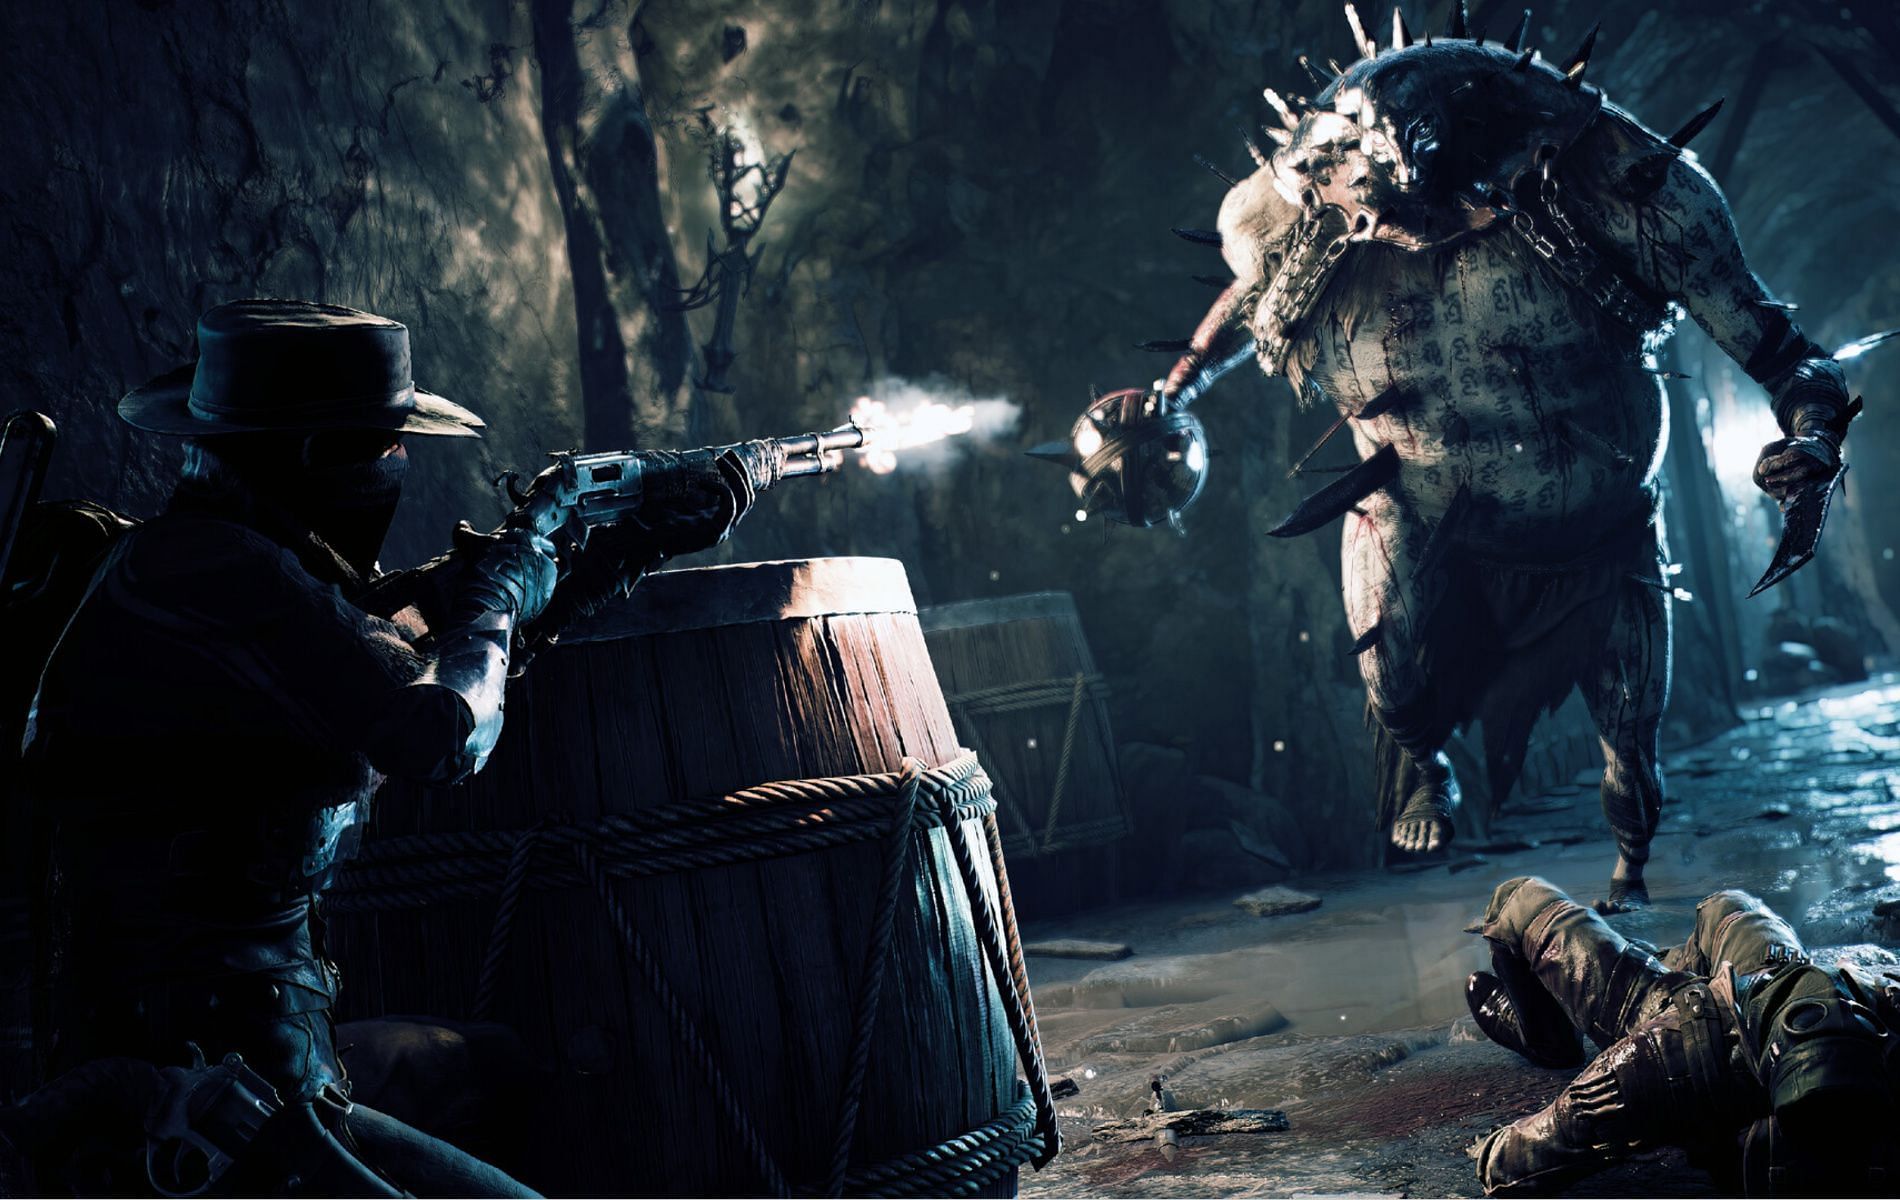 Promotional screenshot for Remnant 2 featuring a player shooting at a massive enemy from behind a barrel